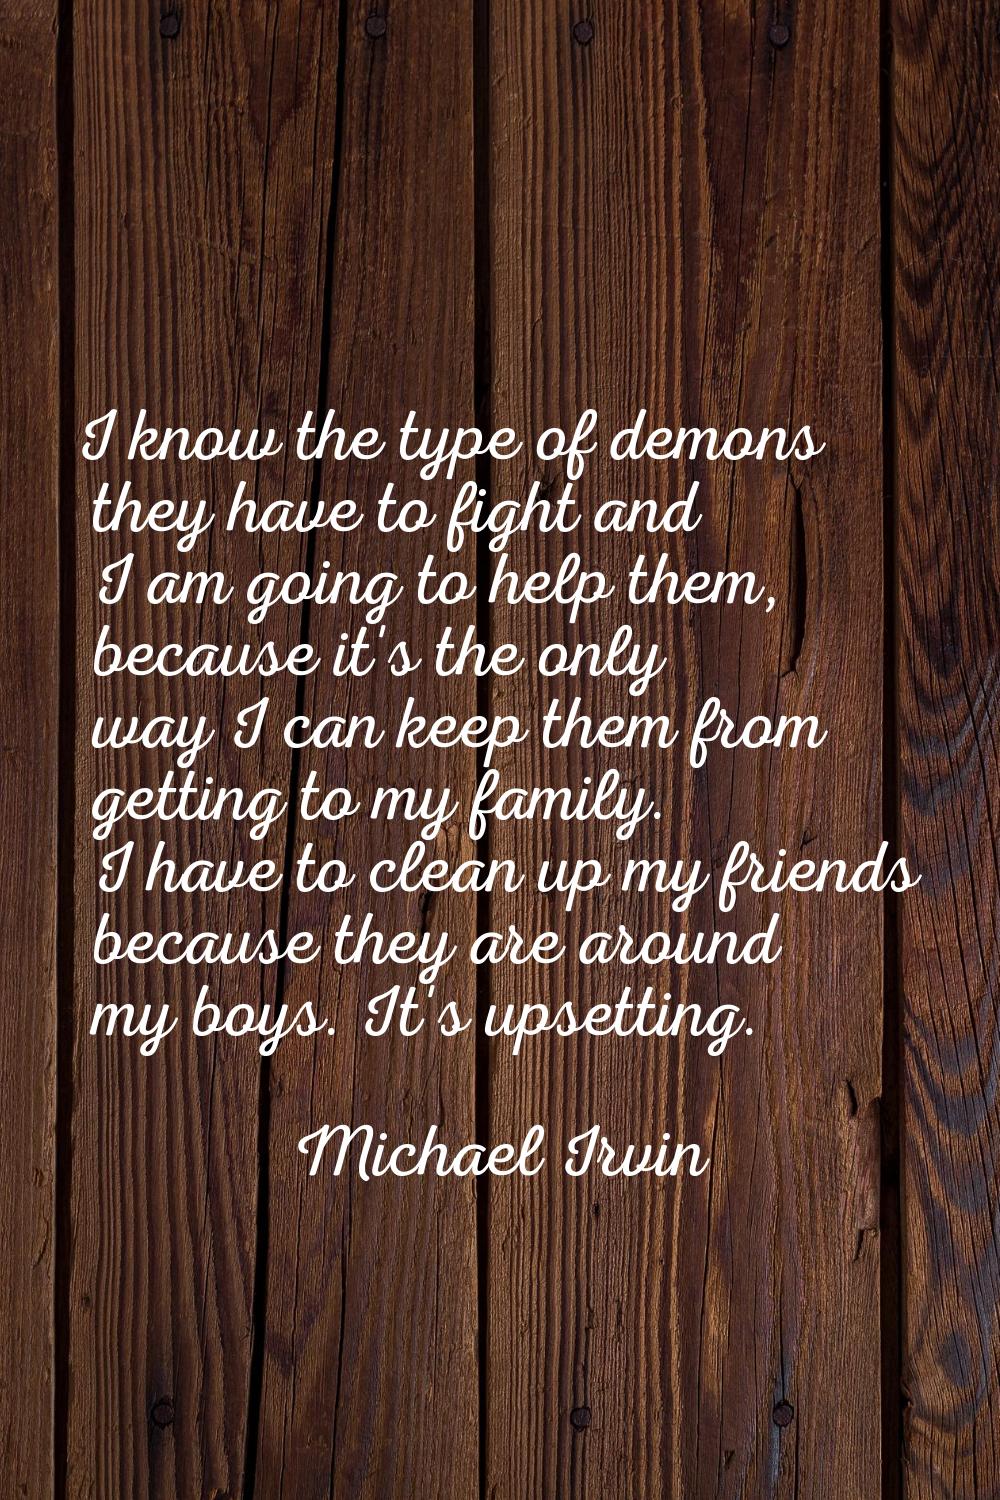 I know the type of demons they have to fight and I am going to help them, because it's the only way